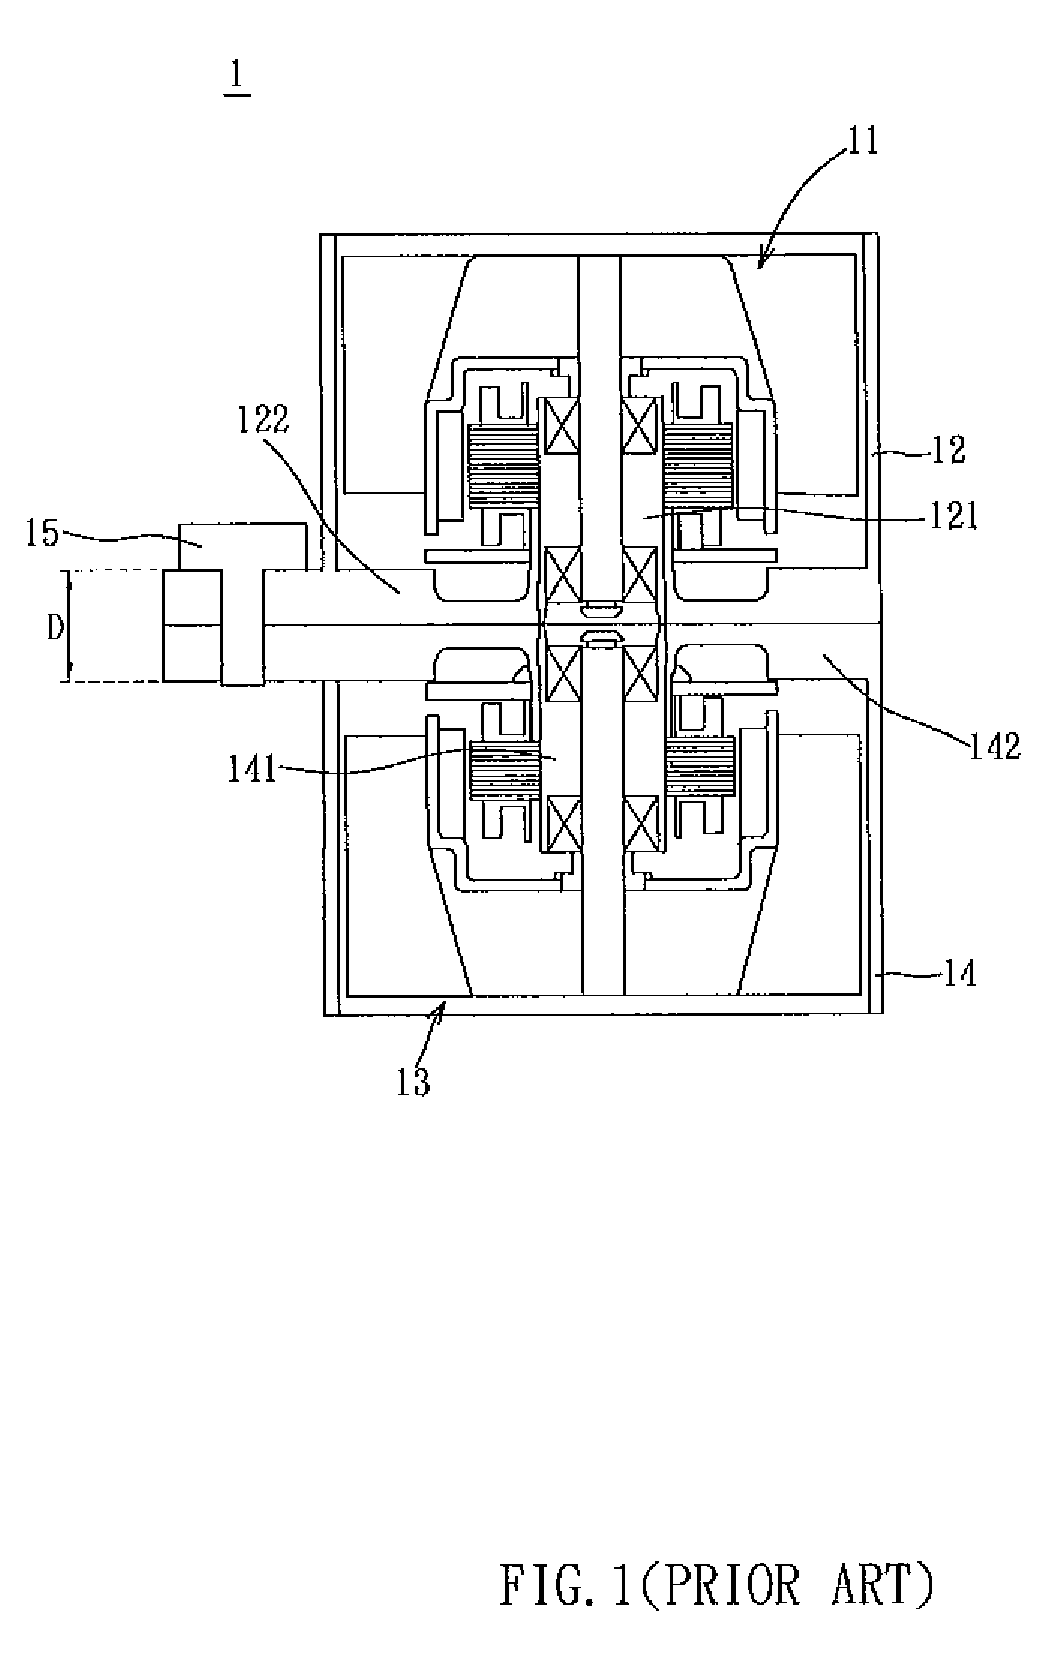 Fan with impellers coupled in series and fan frame thereof